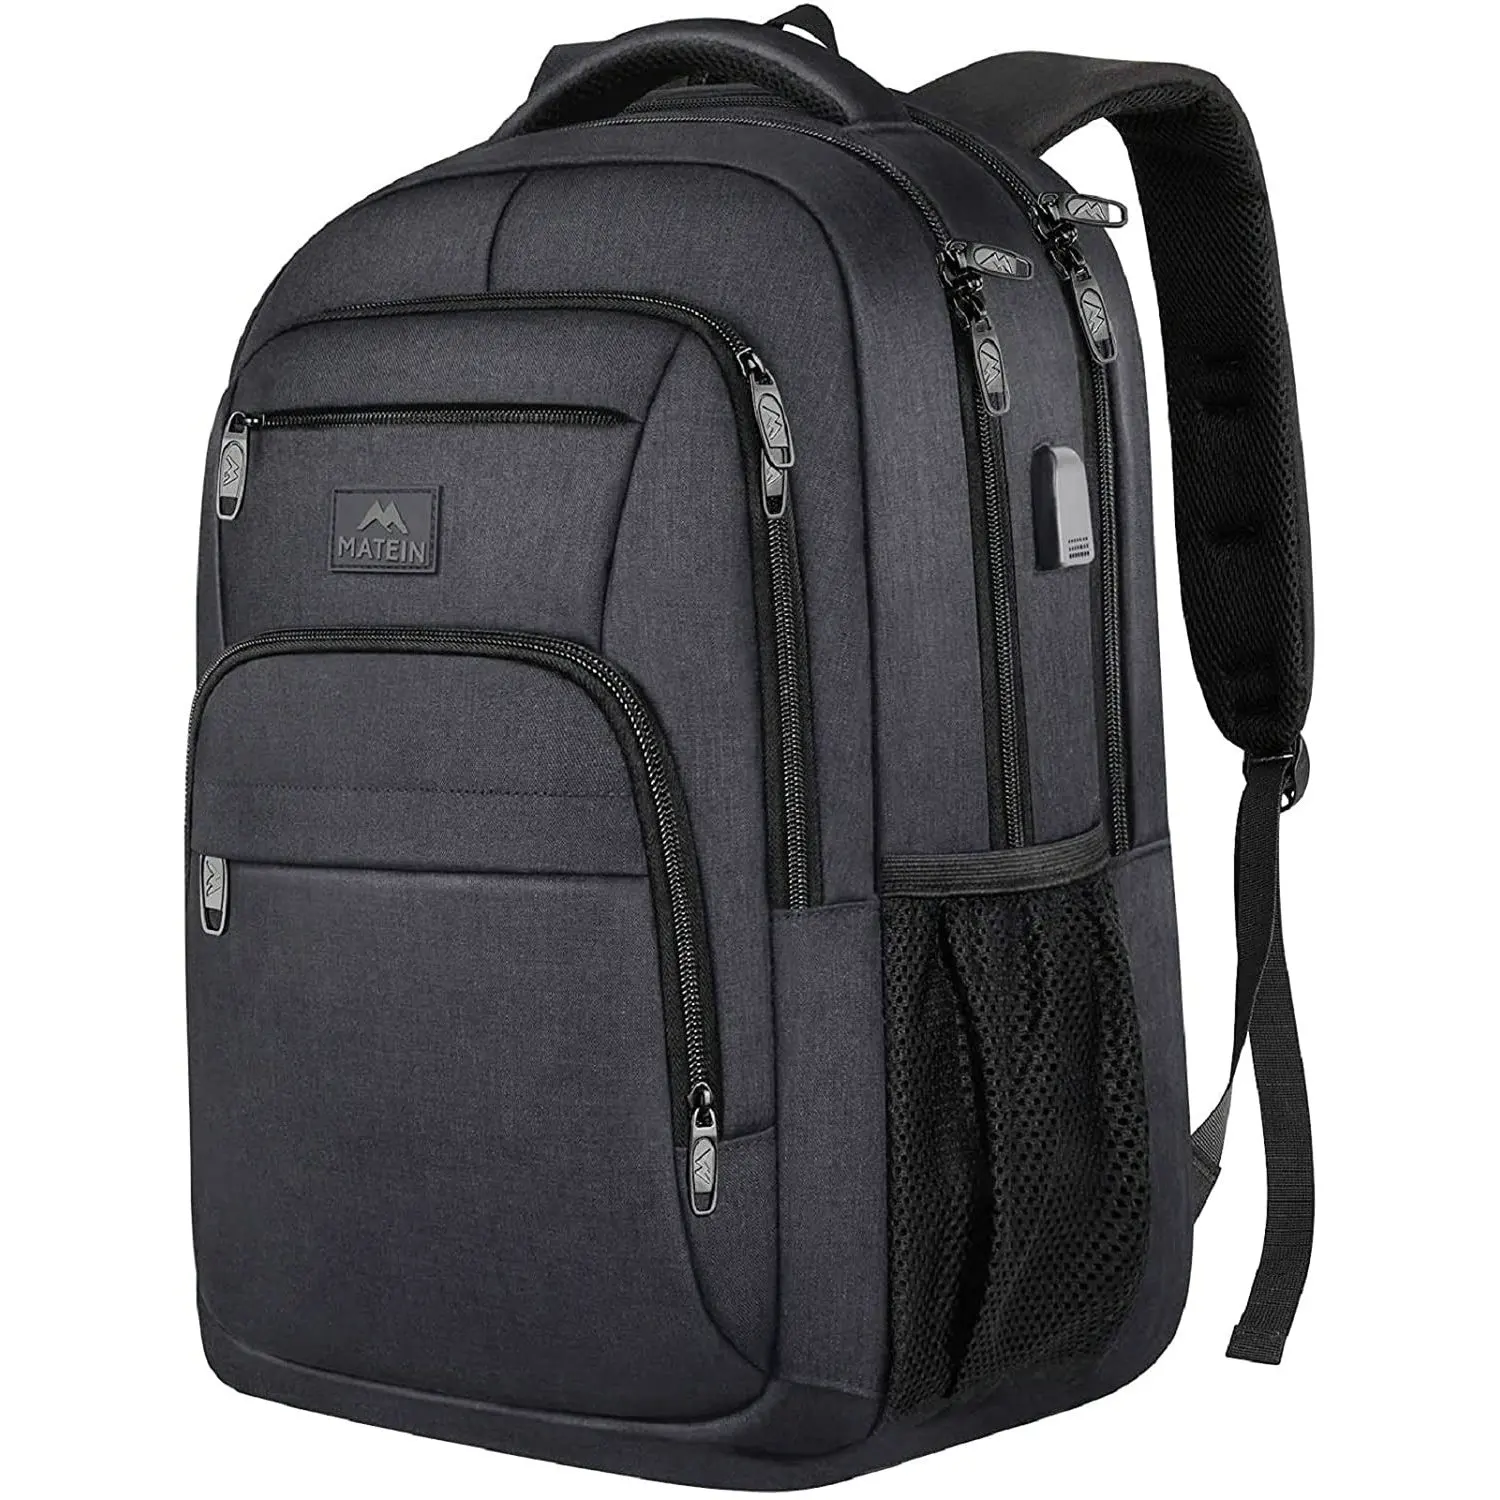 

Hot Selling 15.6 Inch Padded Computer Bag Anti Theft College School Students Bookbag Travel Business Laptop Backpack